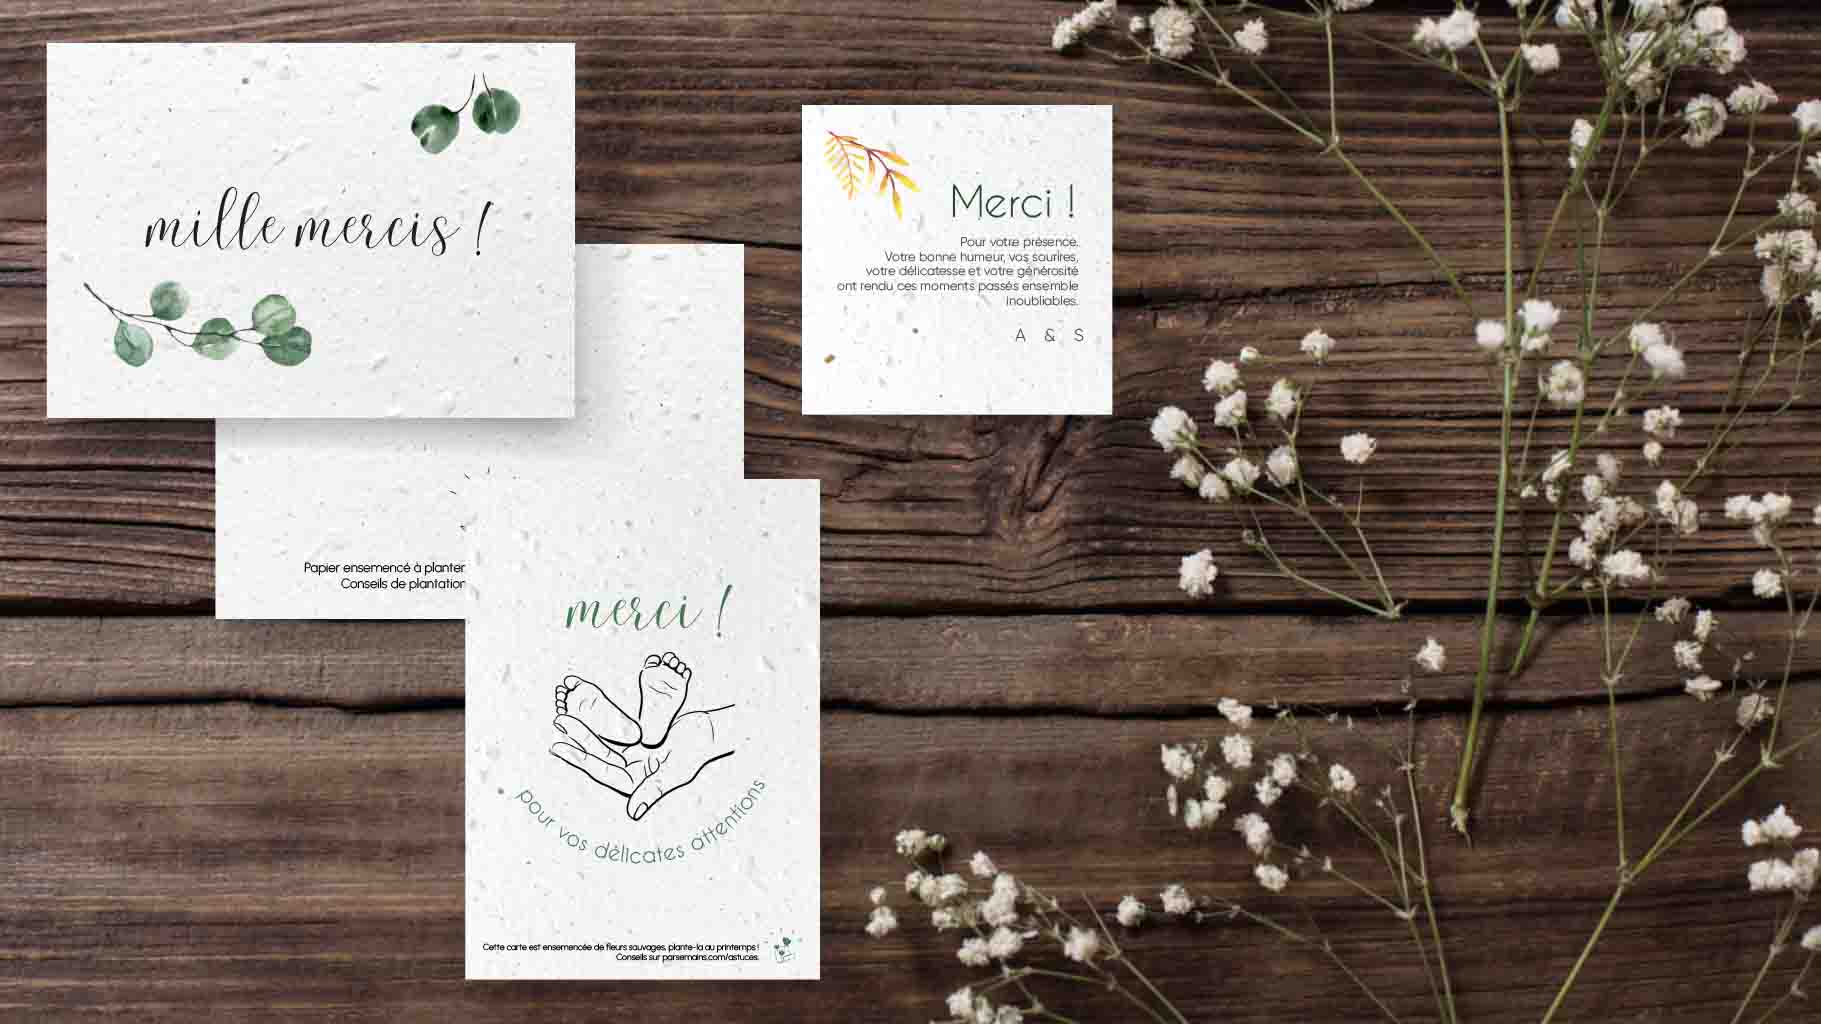 7 Reasons why the Planting Thank You Card is the Perfect Ecological Gift